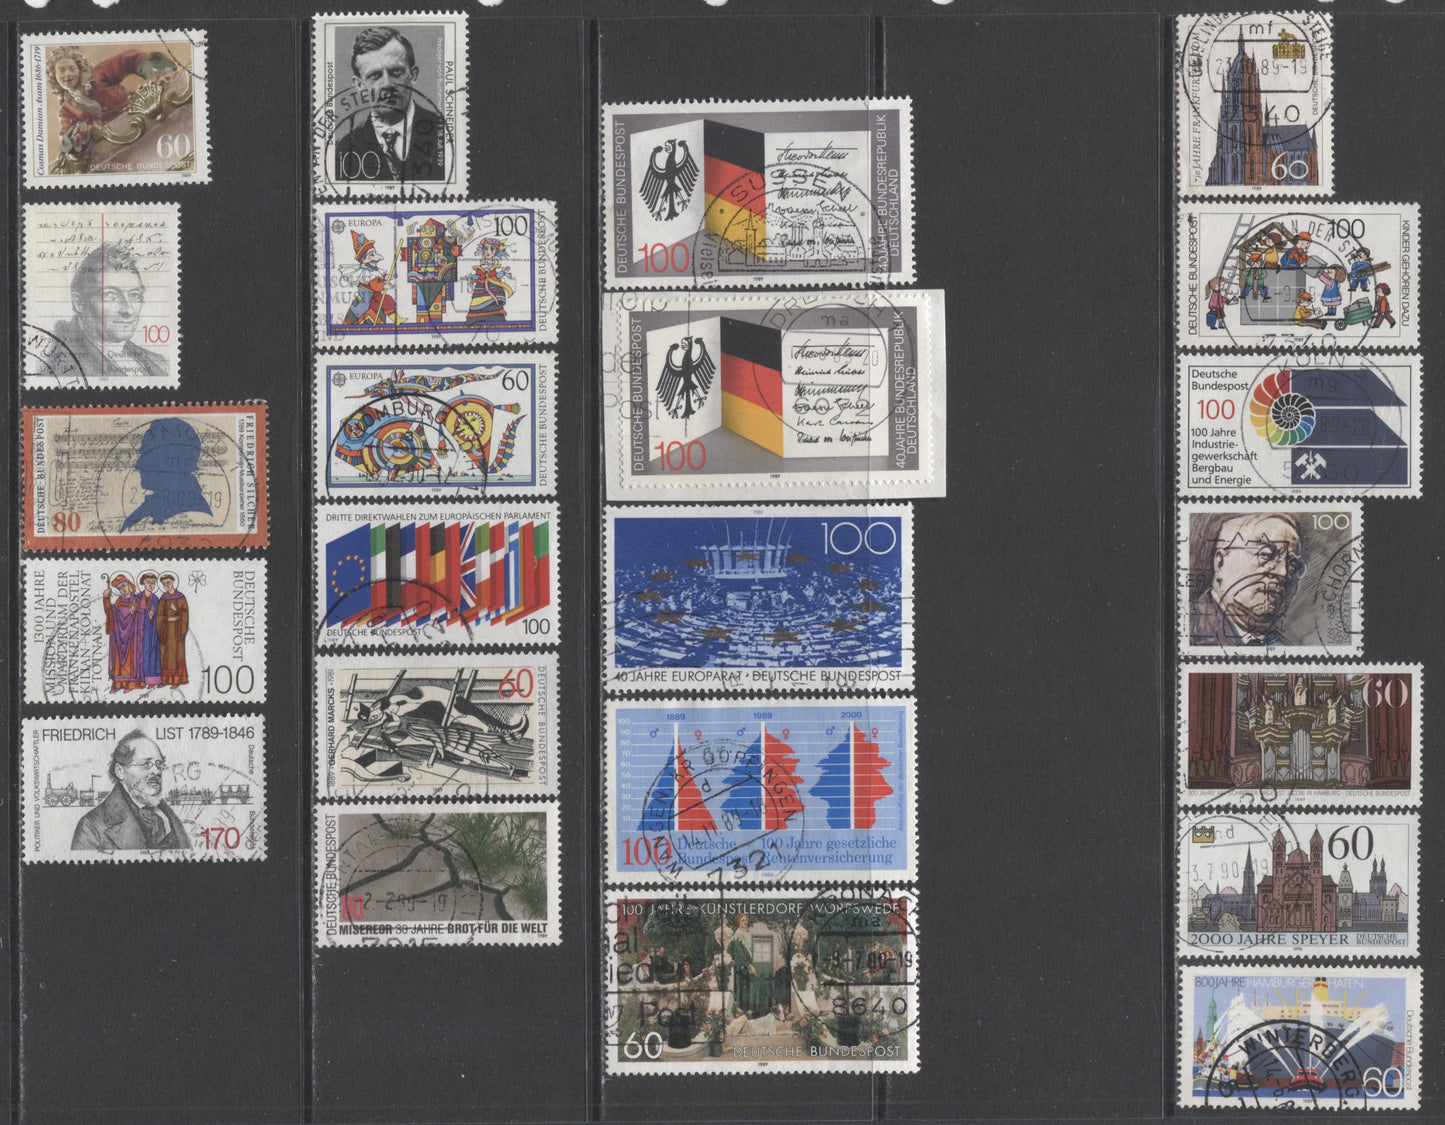 Lot 99 Germany SC#1554/1591 1988-1990 Commemoratives, A VF Used Range Of Singles, 2017 Scott Cat. $20.4 USD, Click on Listing to See ALL Pictures